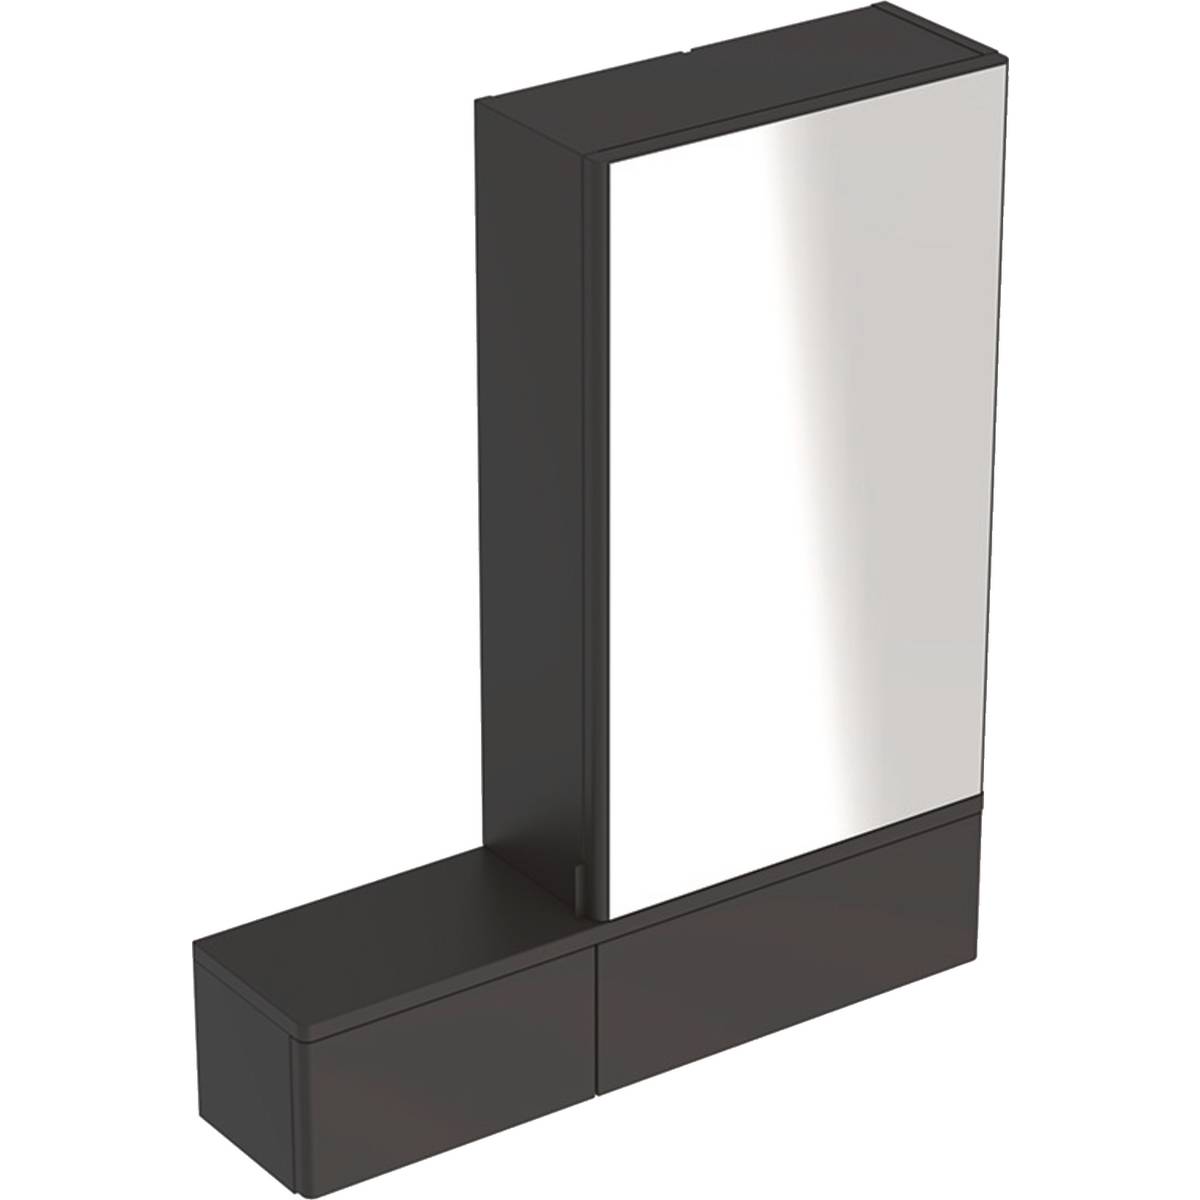 Selnova Square mirror cabinet with one door and two pull-down doors